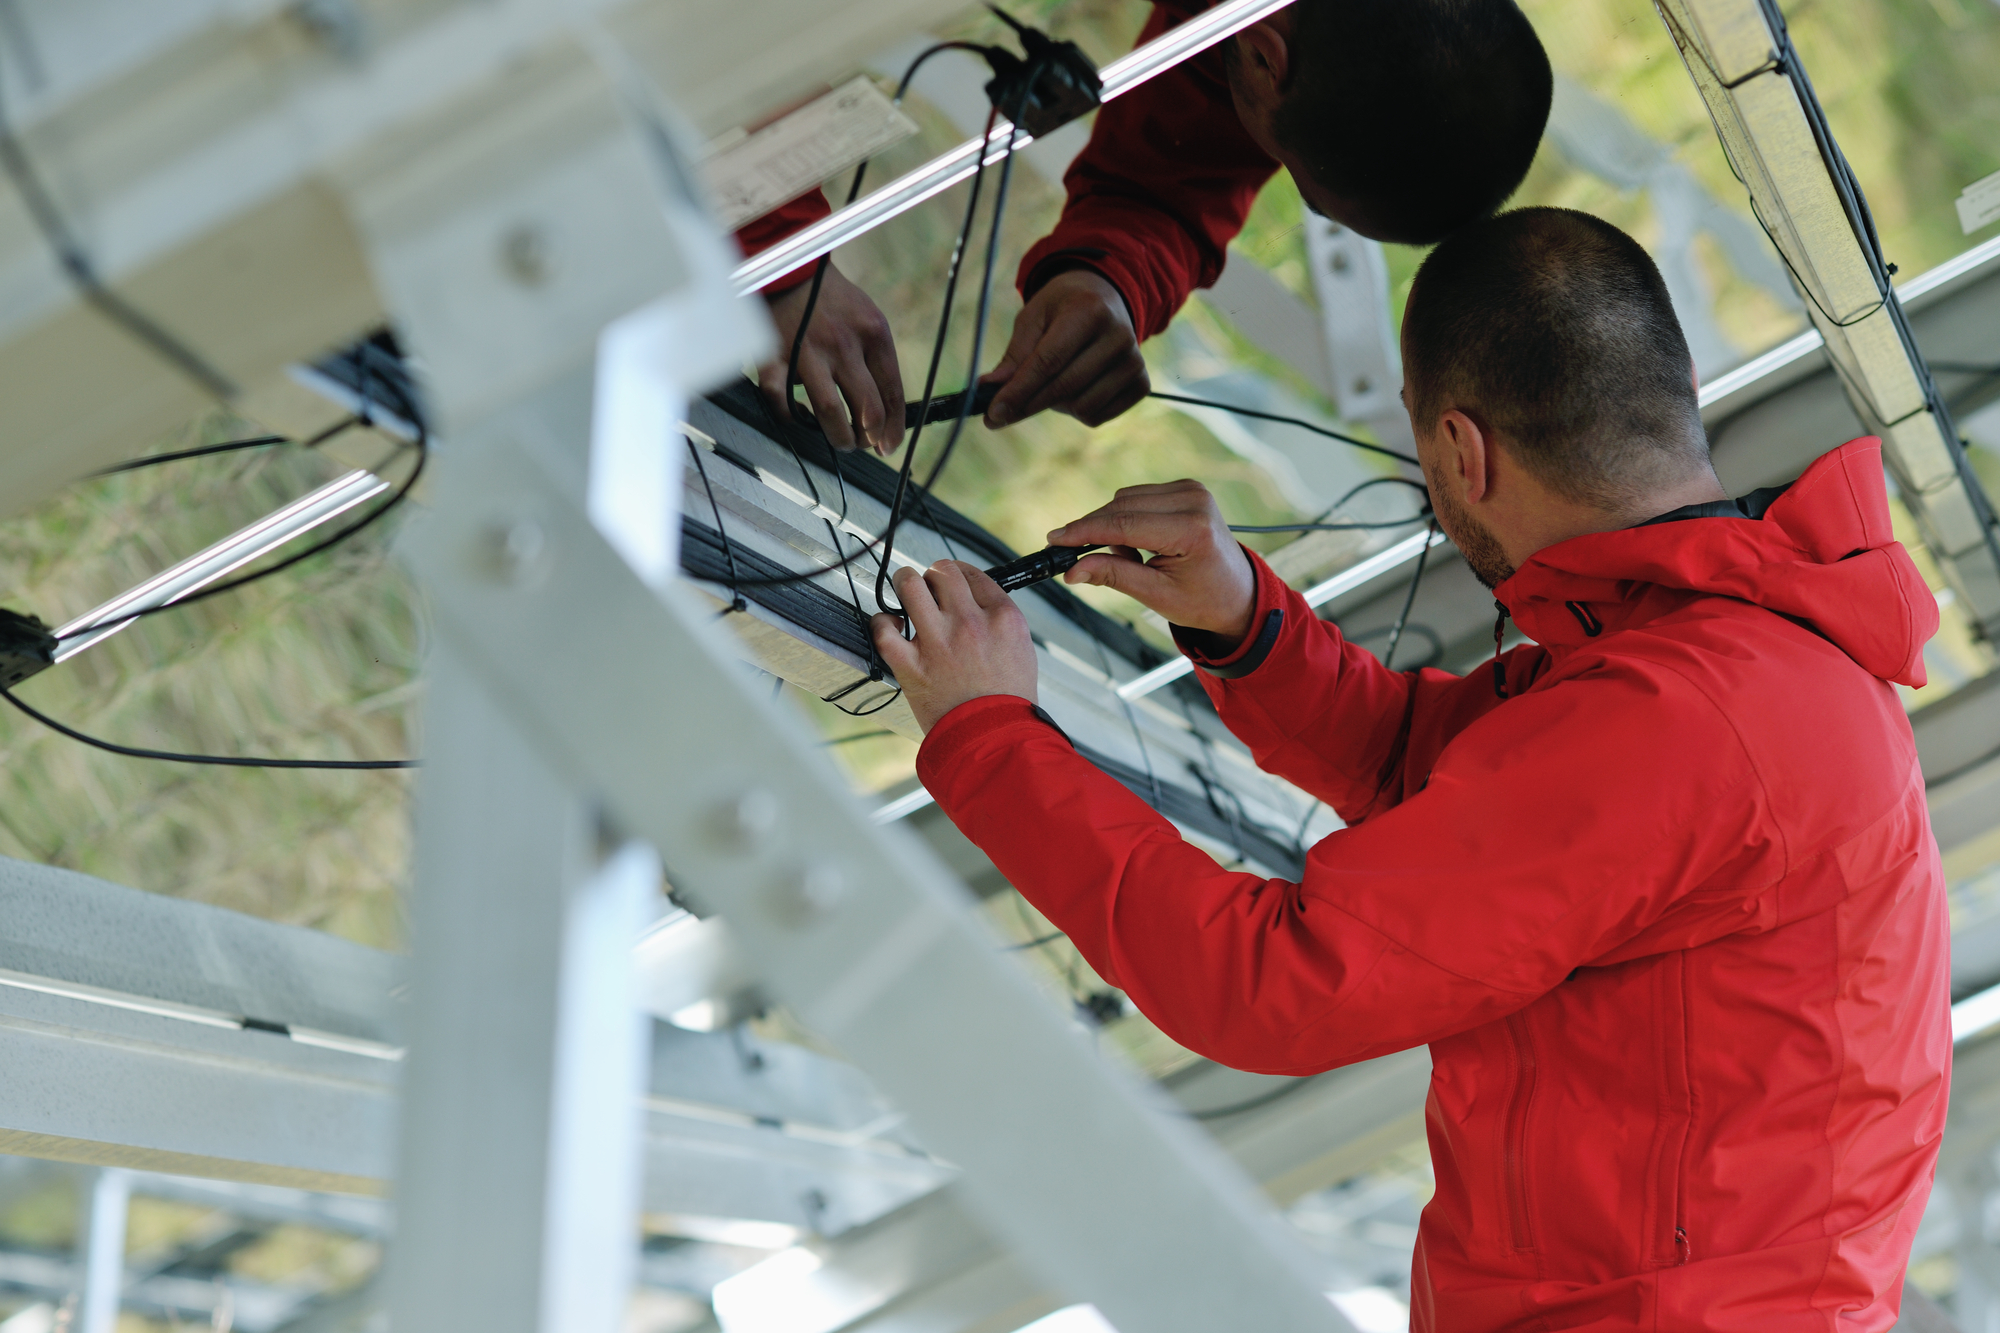 Solar Panel Repair: Common Problems And How Repair Services Can Help Solve Them